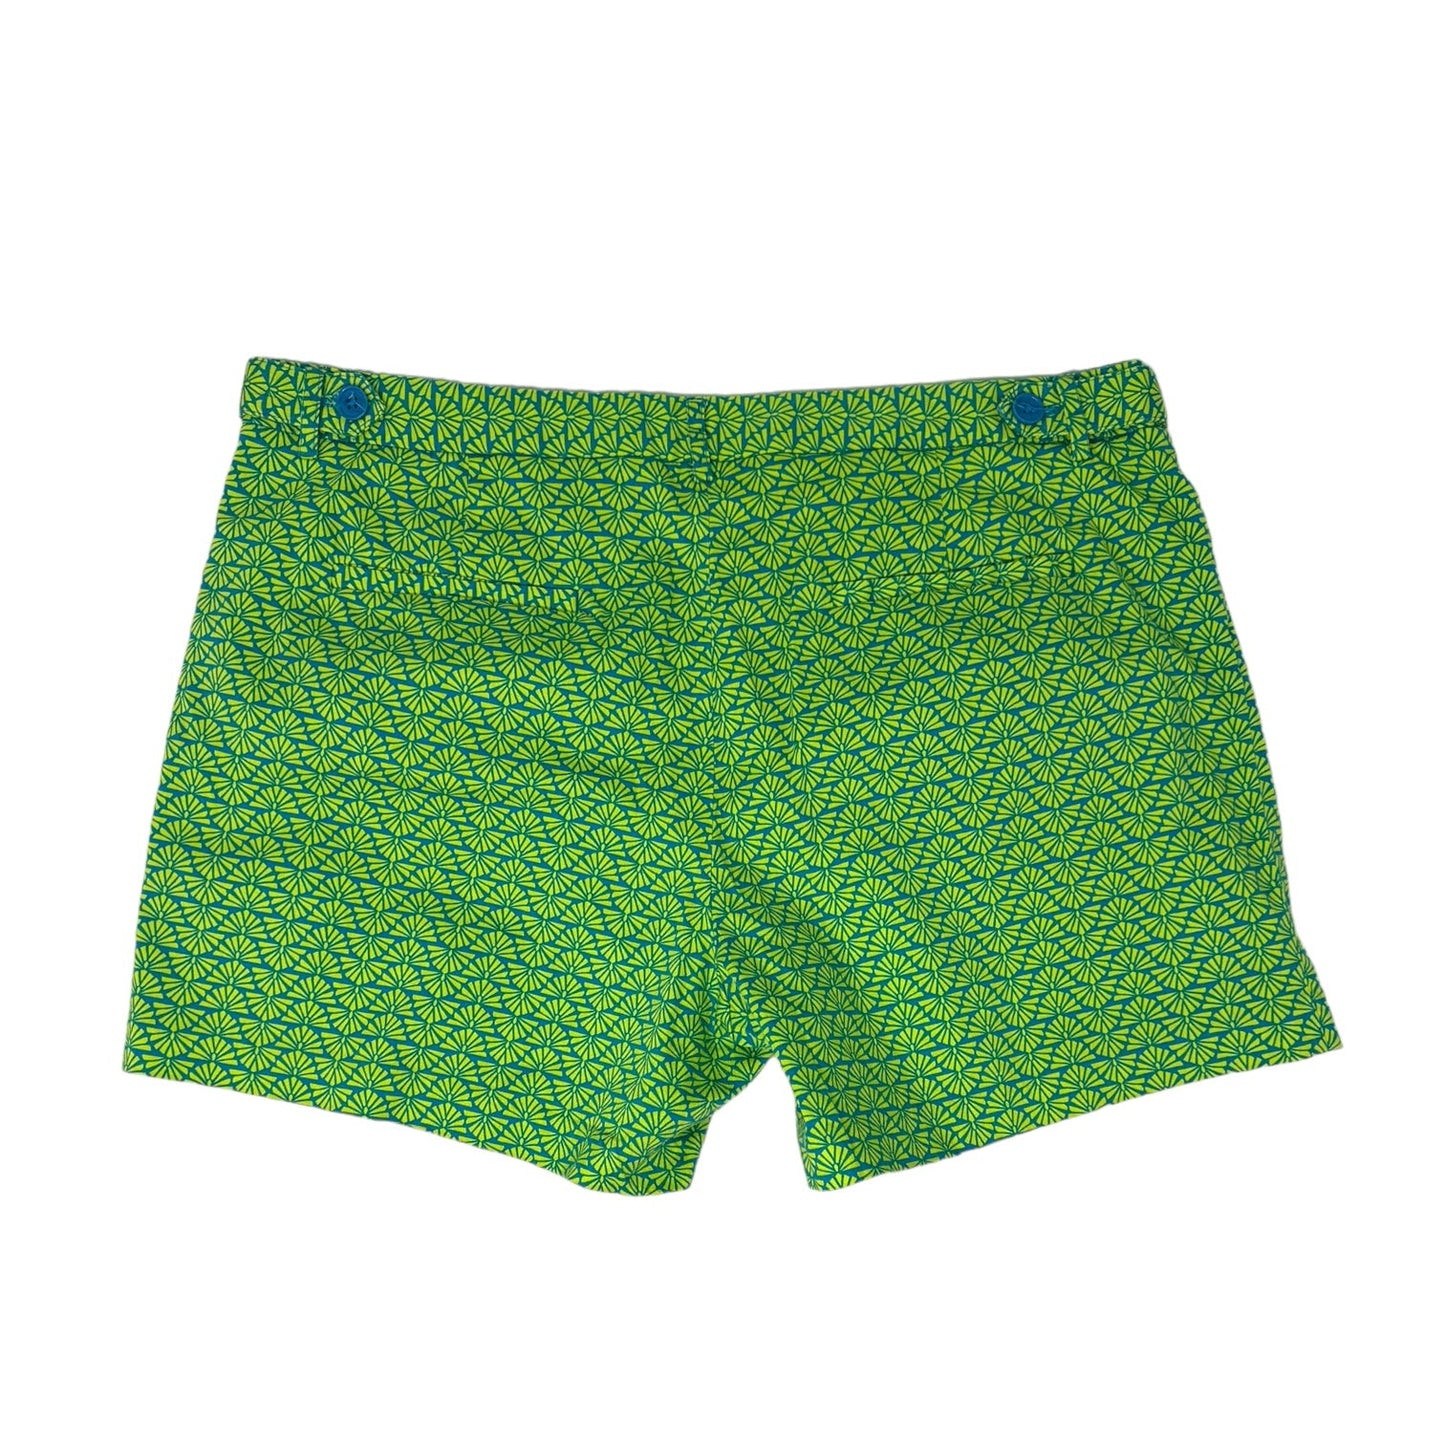 Green Shorts Laundry By Shelli Segal, Size 10